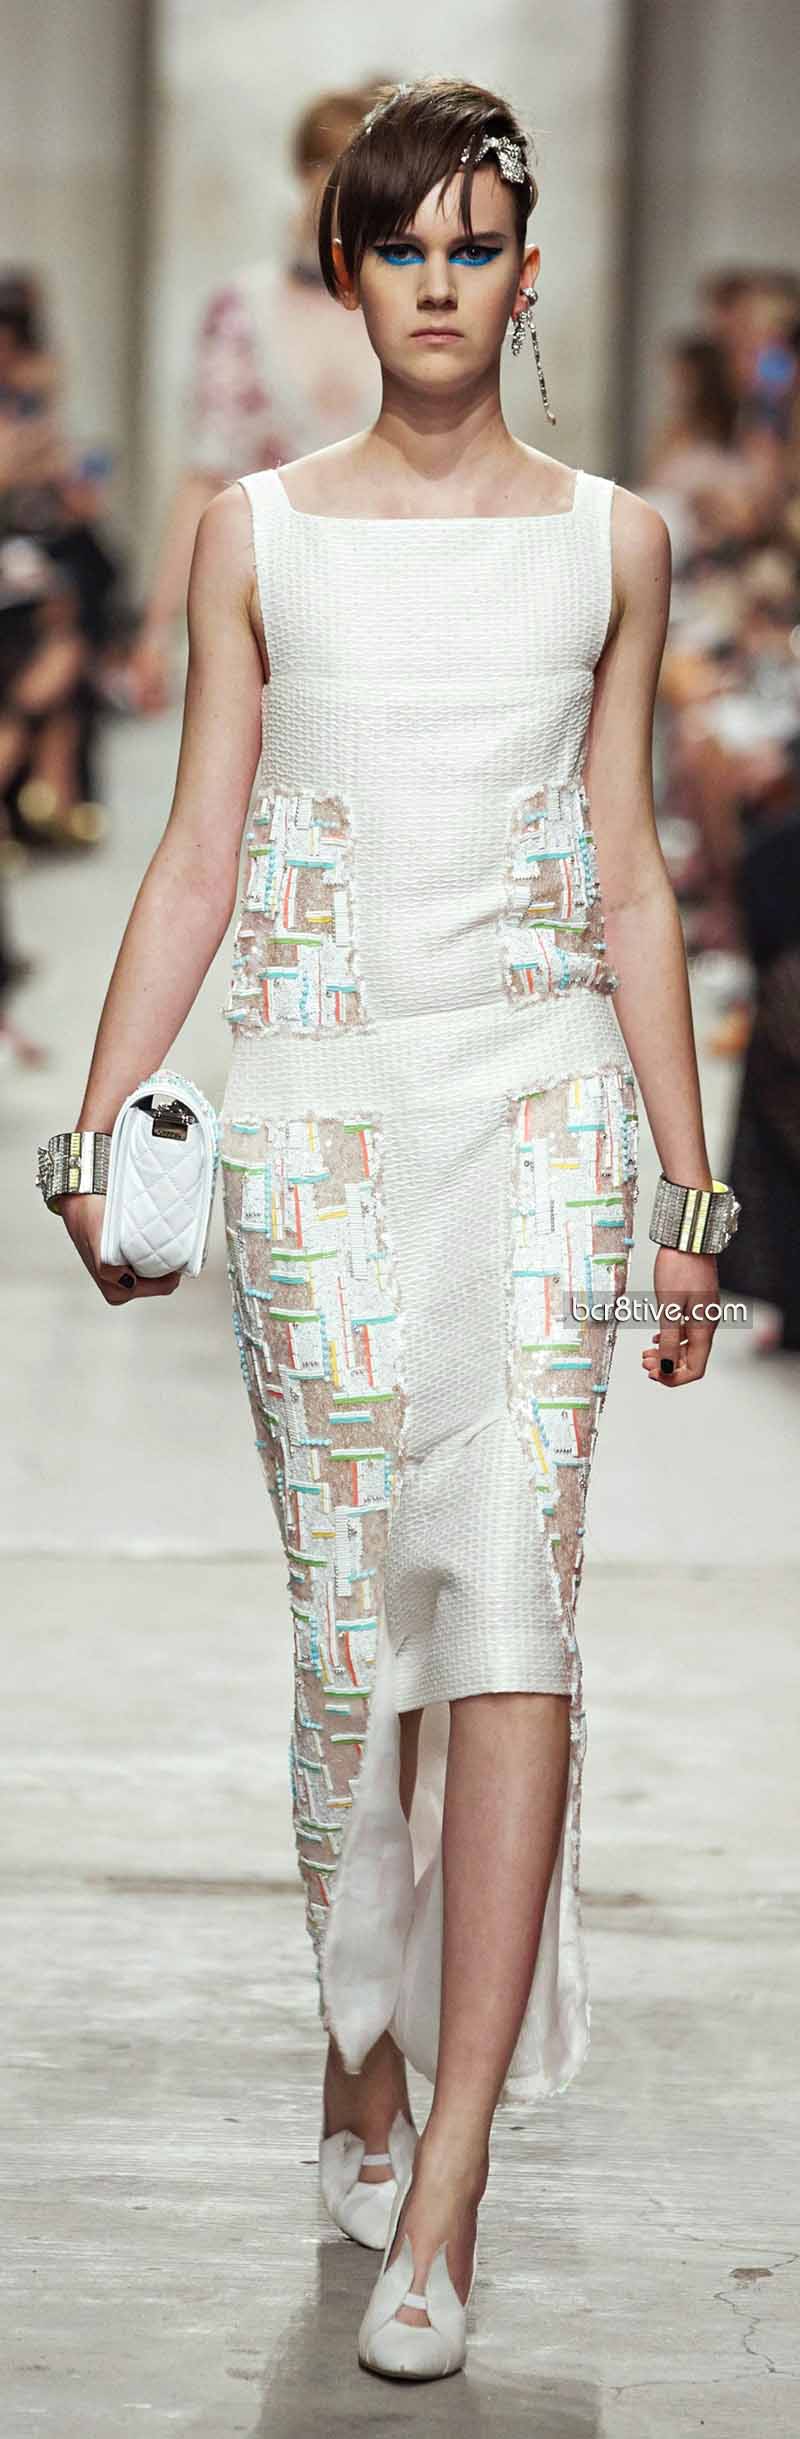 Chanel Resort 2013-14 Page 2 – Be Creative